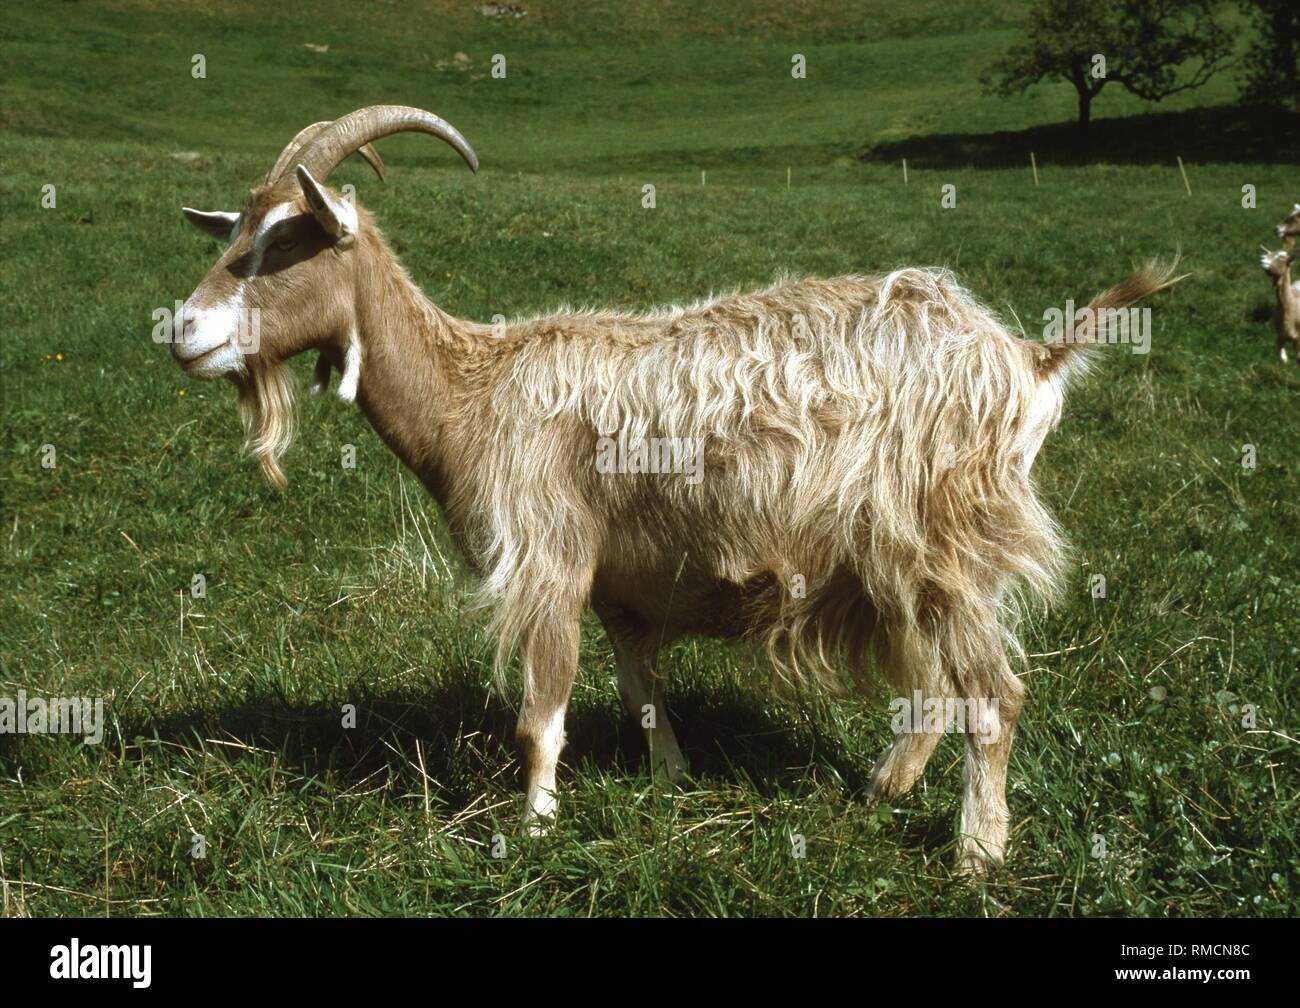 The Toggenburg goat originates from the Swiss Canton of St. Gallen and was already known around 1800. It has the typical white Swiss markings from ear to mouth. The breed spread in Central Europe, but also to North America. With the decreasing importance of goat keeping, this originally long-haired breed slowly declined. Stock Photo